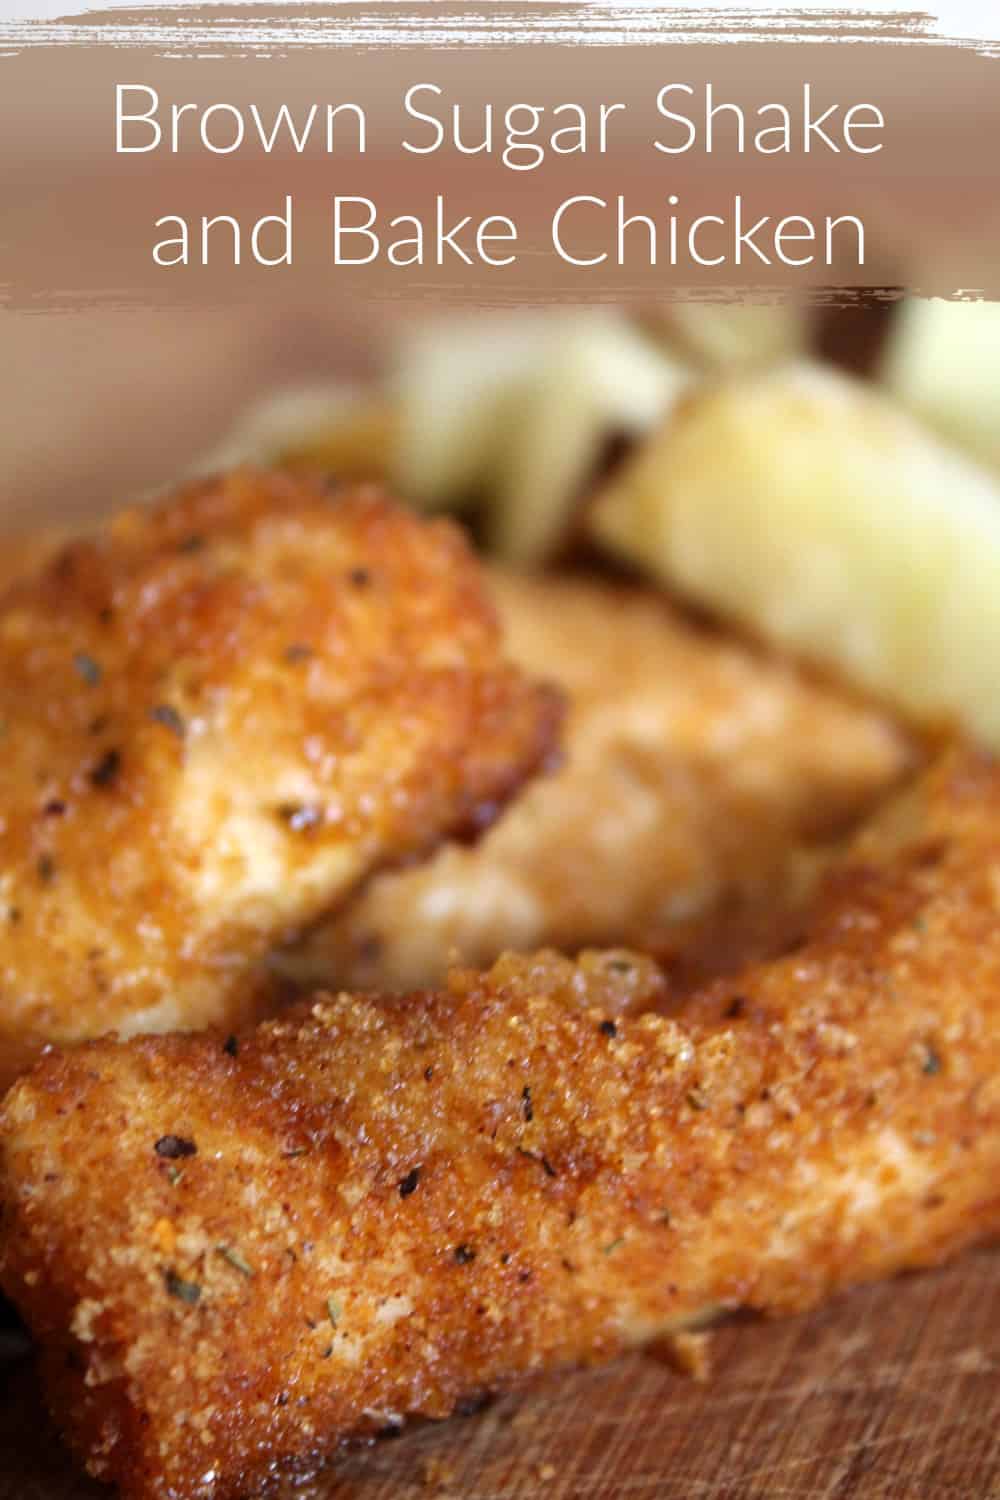 Finding an easy chicken recipe for moms isn't hard with this Brown Sugar Shake and Bake chicken nugget recipe that is sure to be a hit!